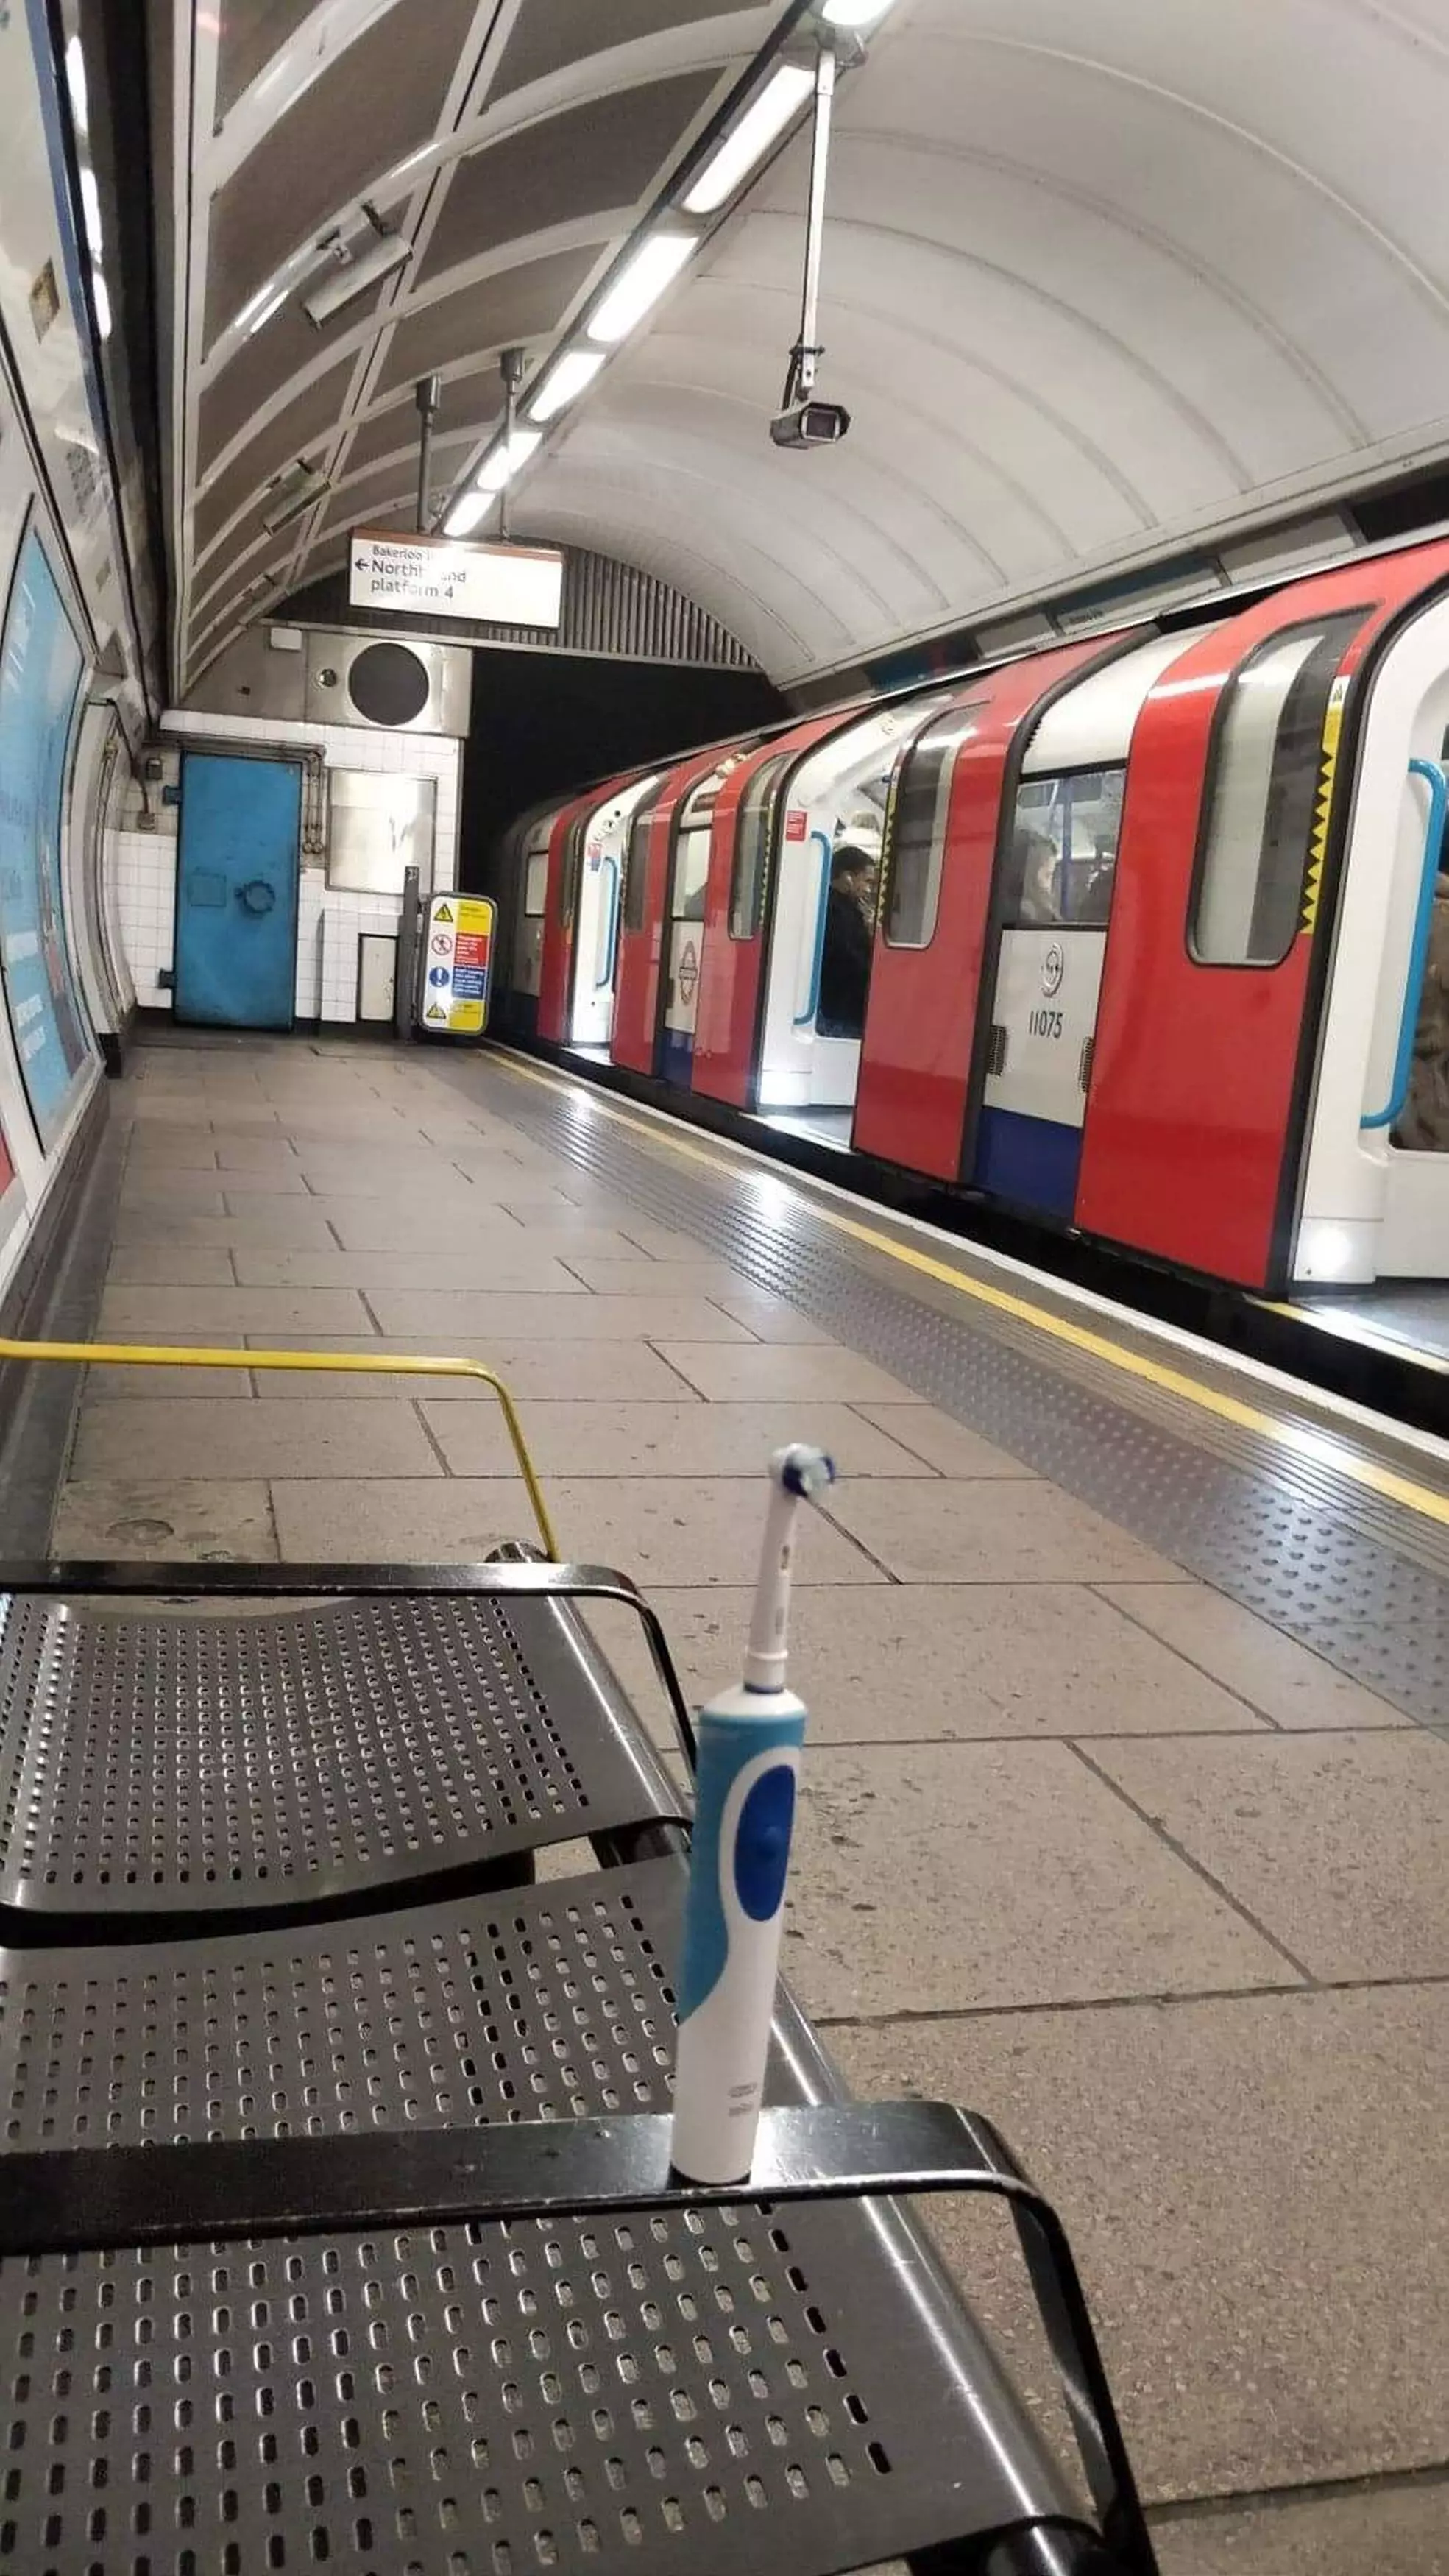 The toothbrush waiting for the tube in London.